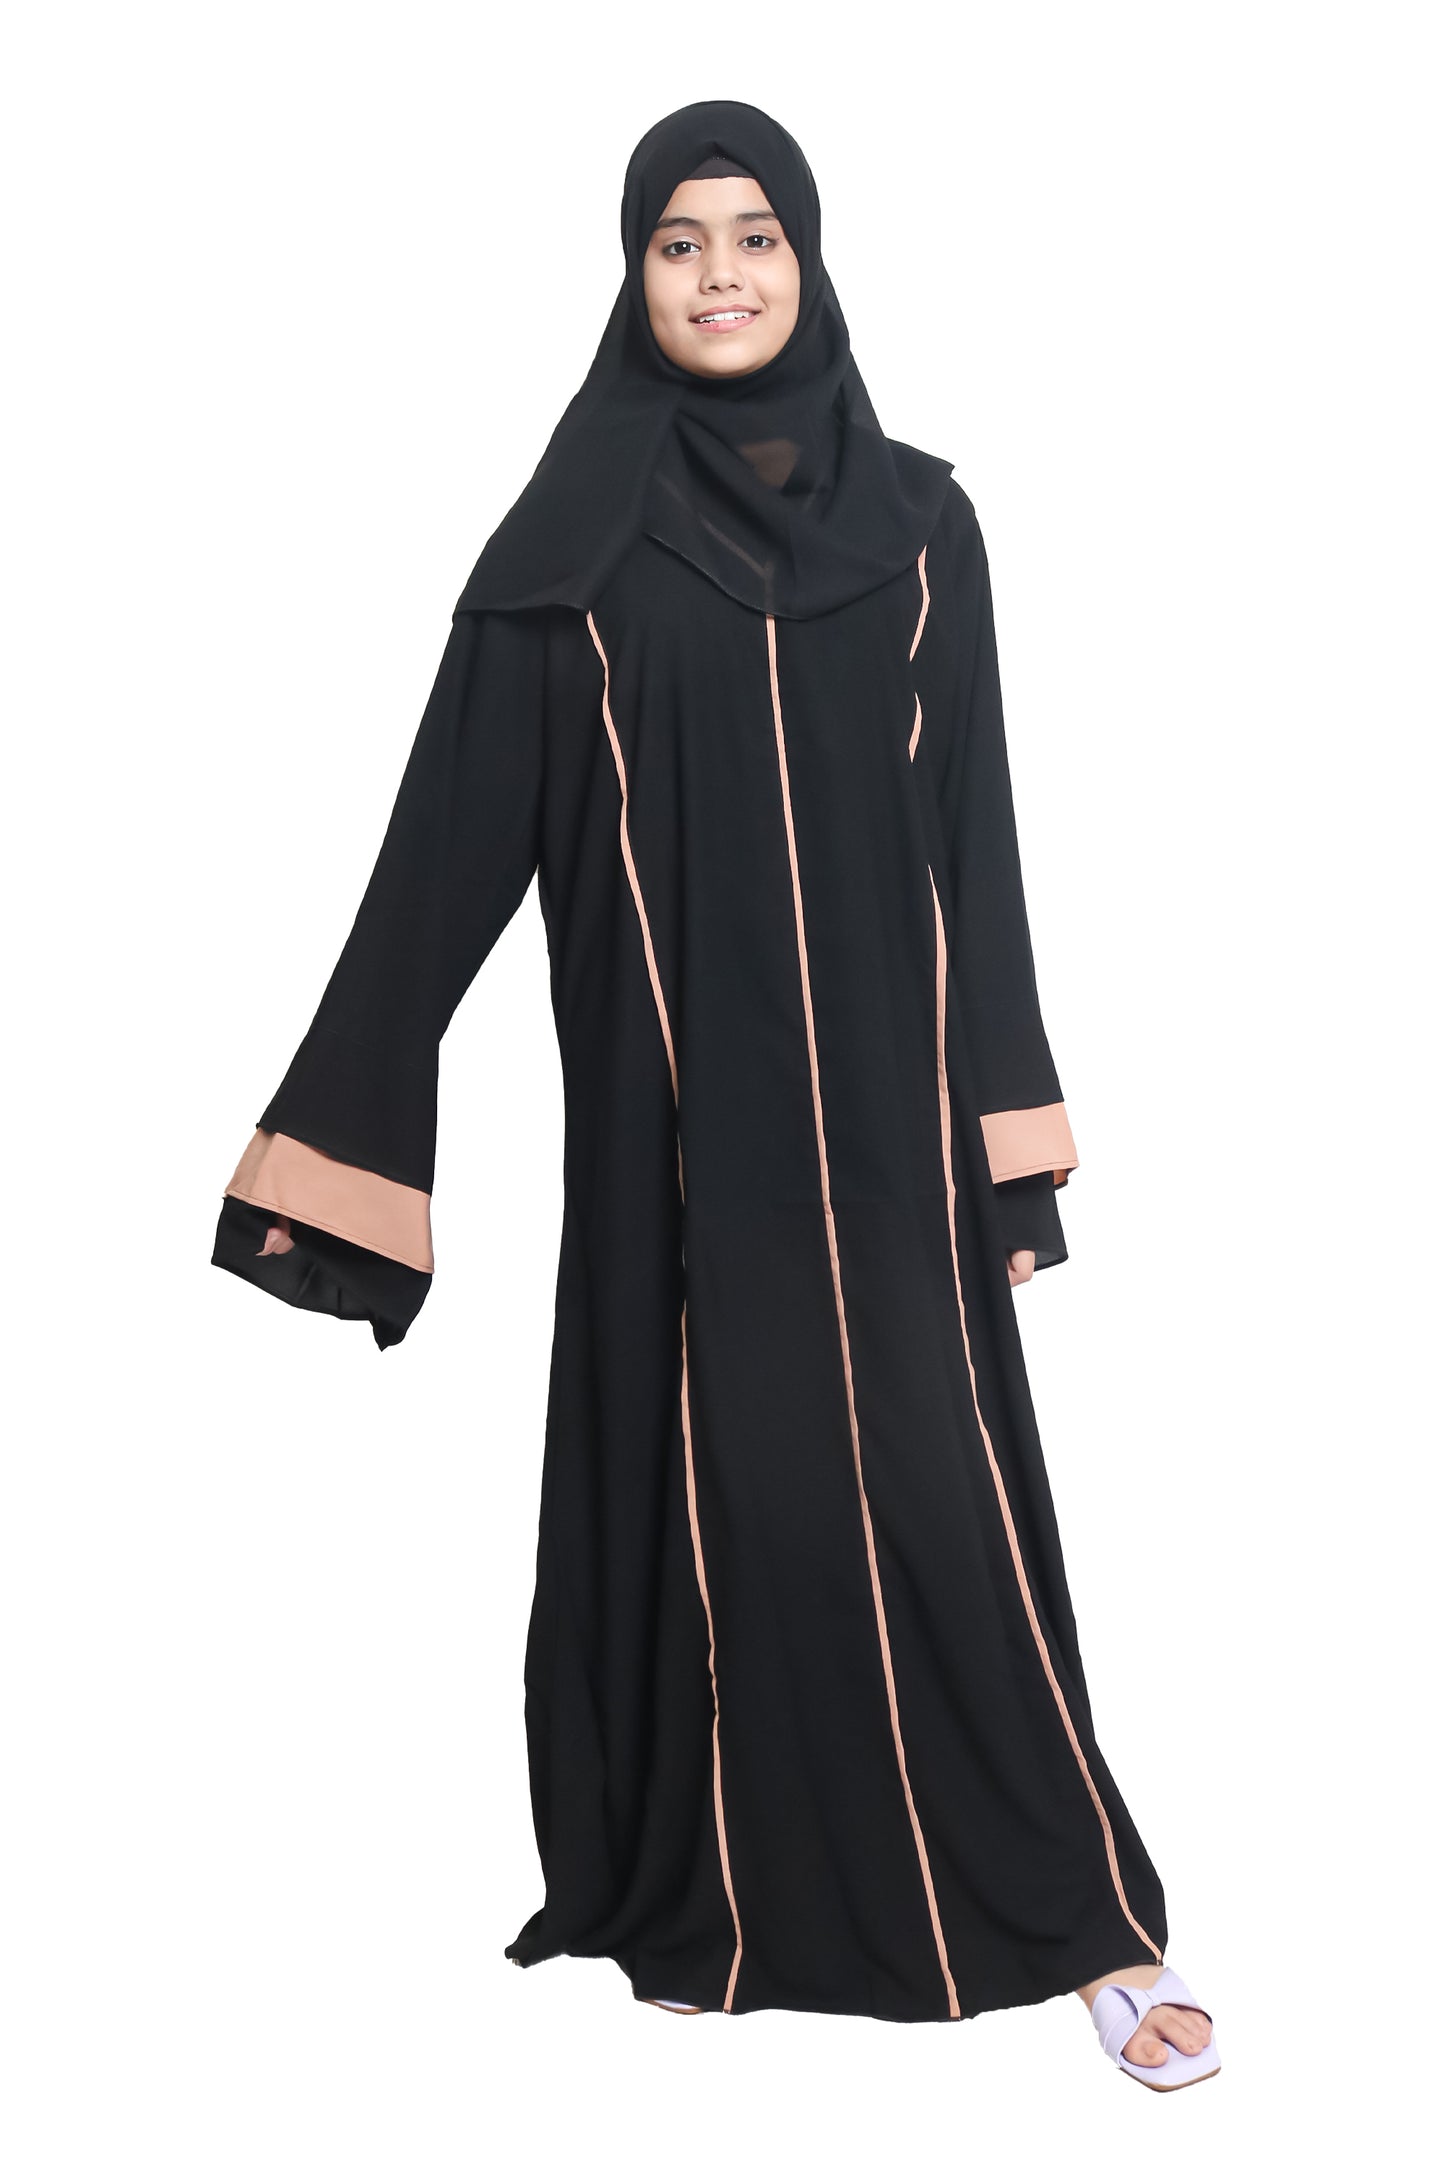 Modest City  Self Design Black Paralllel Stripes Crepe Abaya or Burqa with Hijab for Women & Girls-Series Laiba